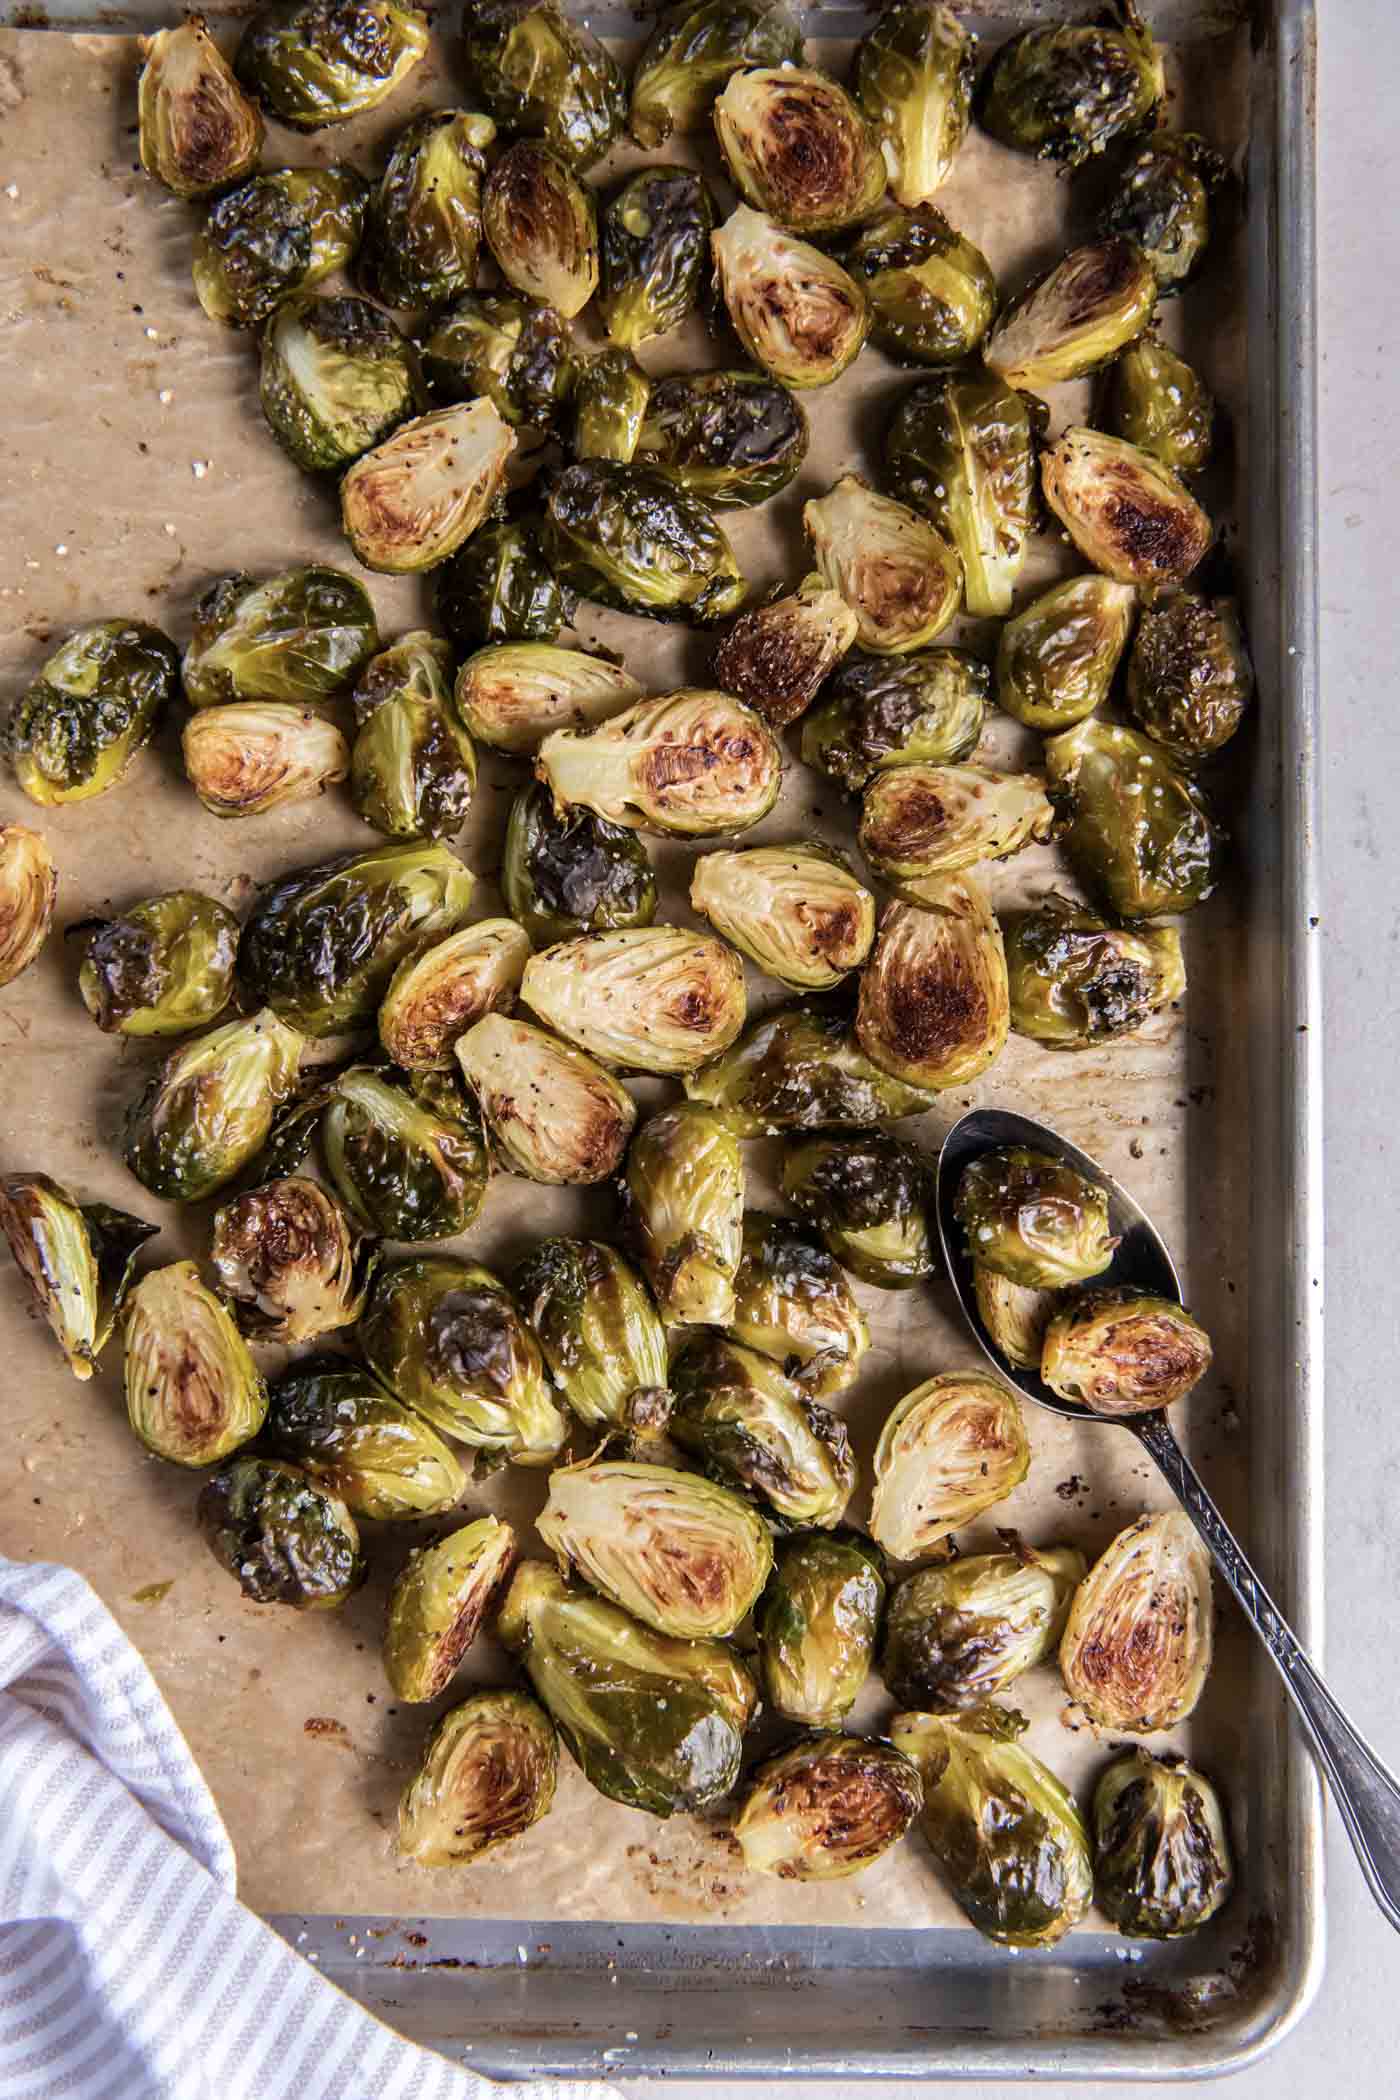 Roasted Brussels sprouts on a baking sheet with a spoon.